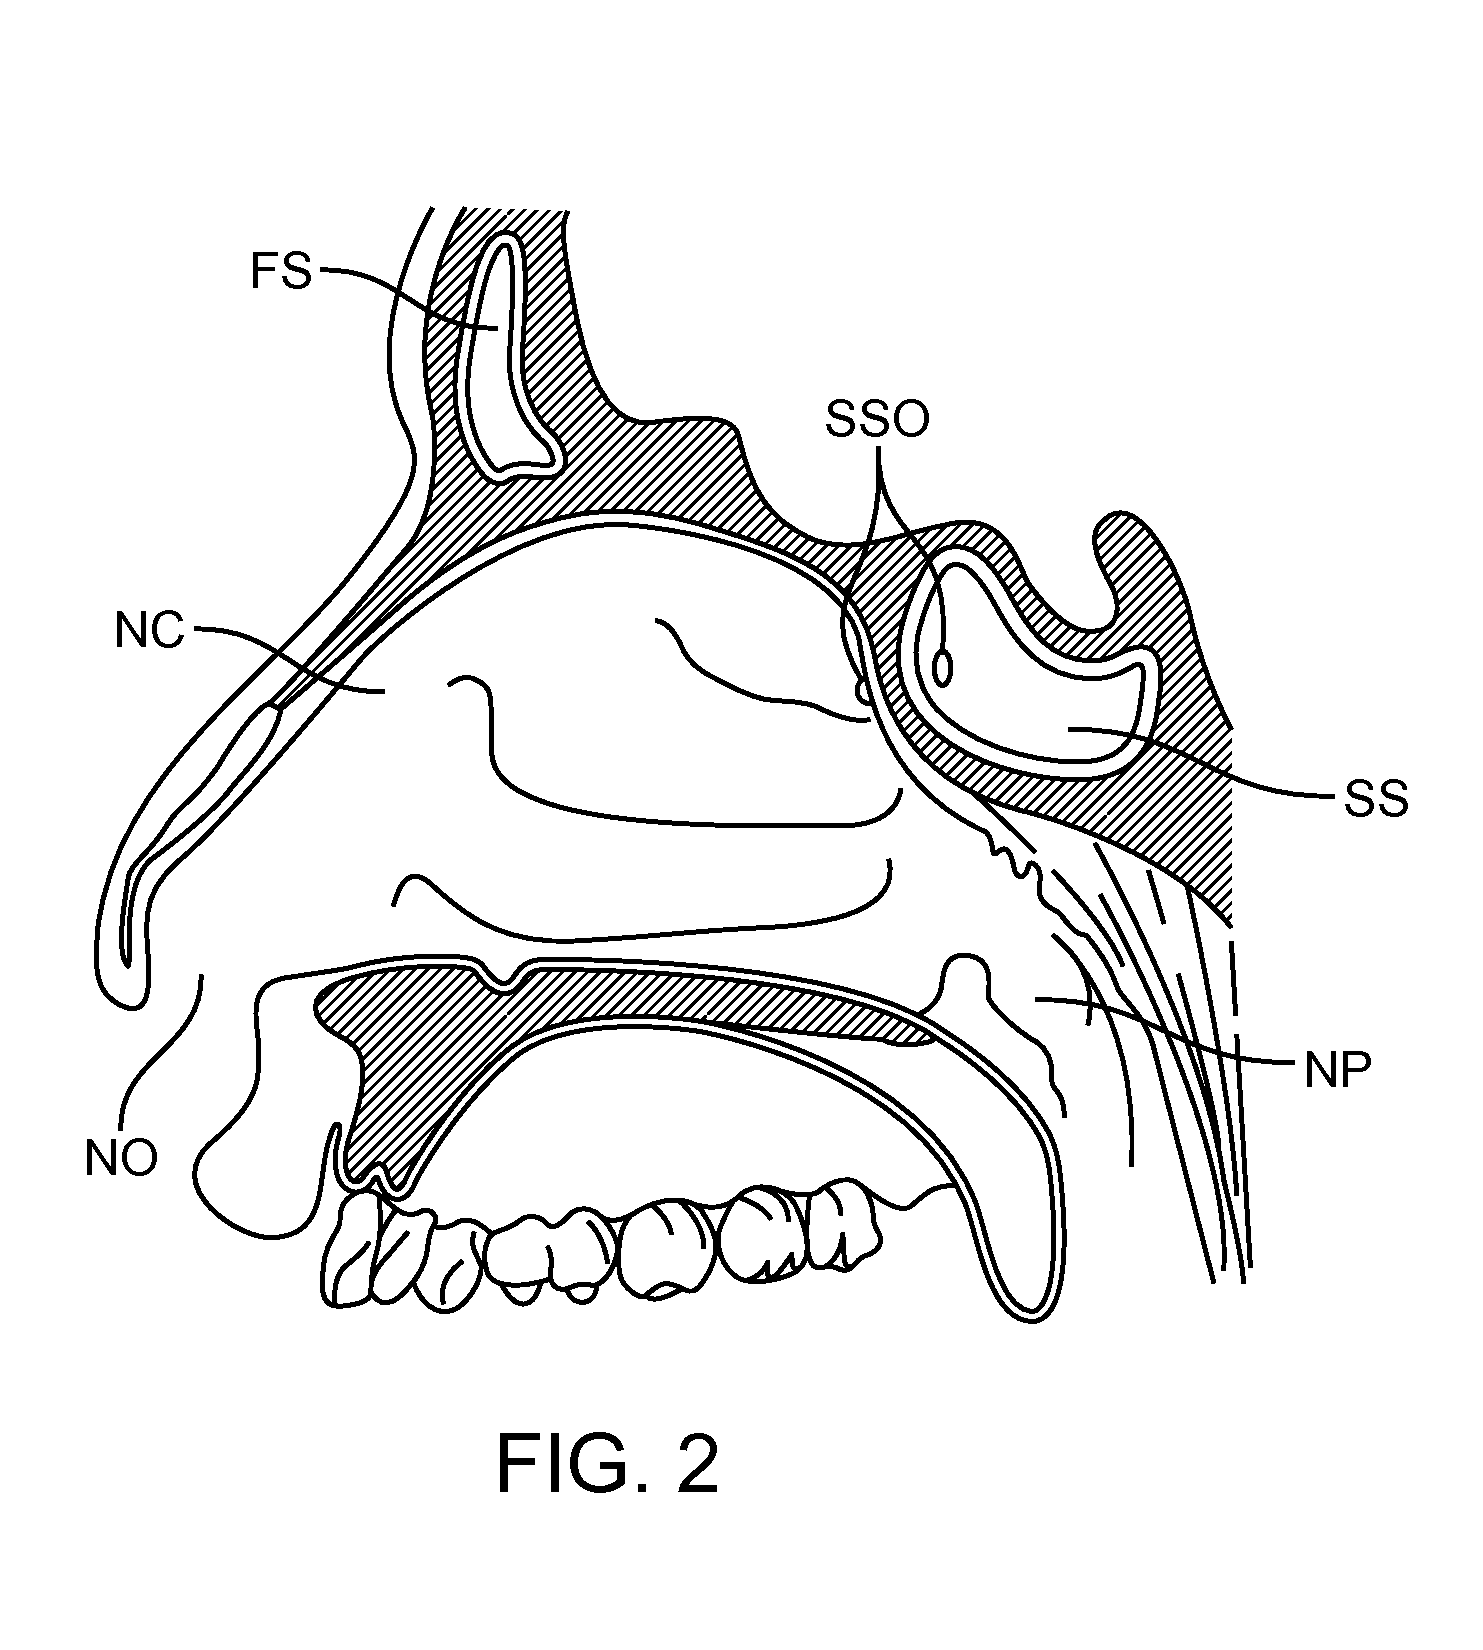 Devices and Methods for Dilating a Paranasal Sinus Opening and for Treating Sinusitis